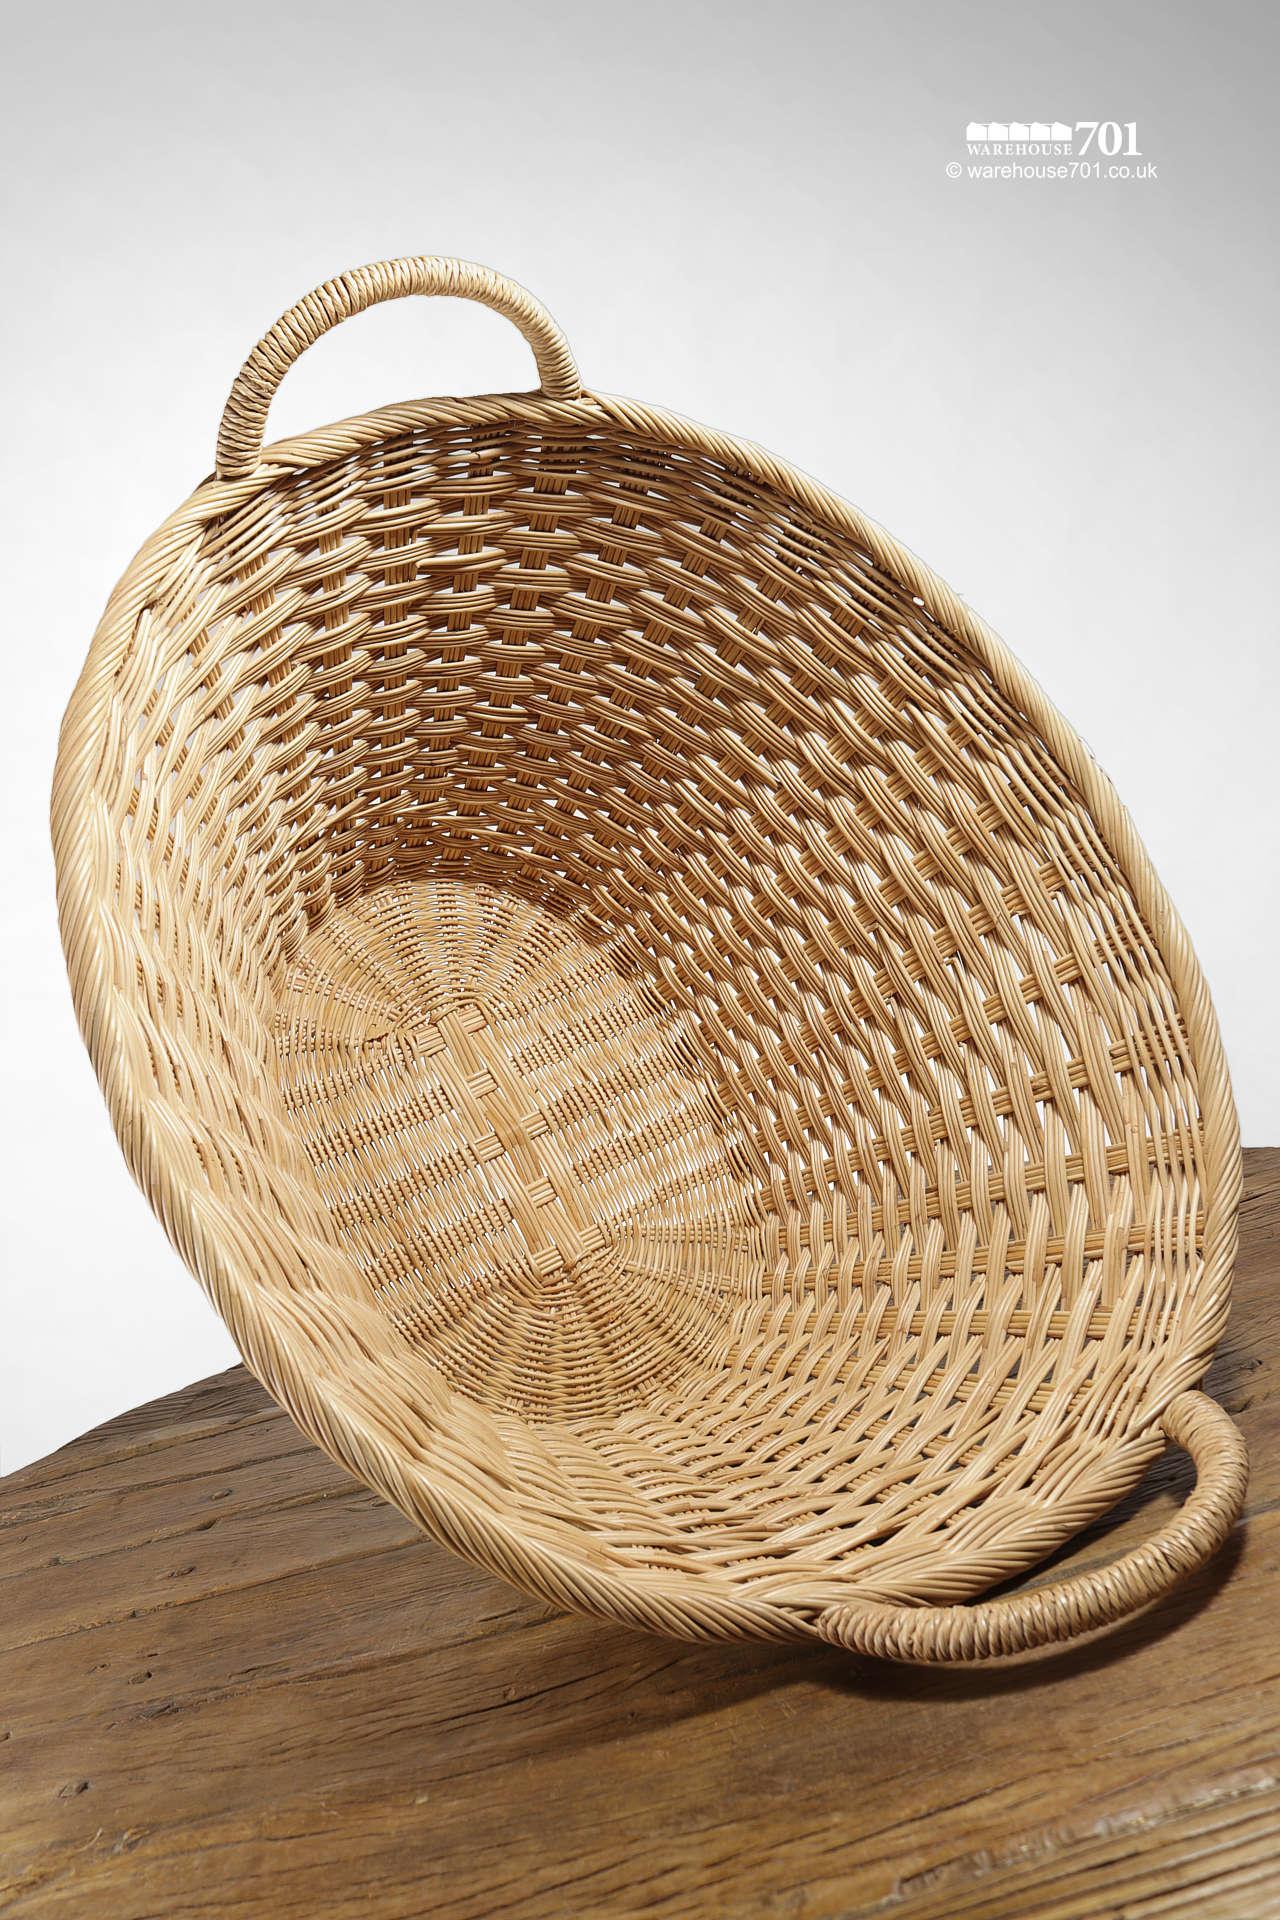 NEW Oval Shape Double Handle Wicker Laundry, Toy or Log Basket #1